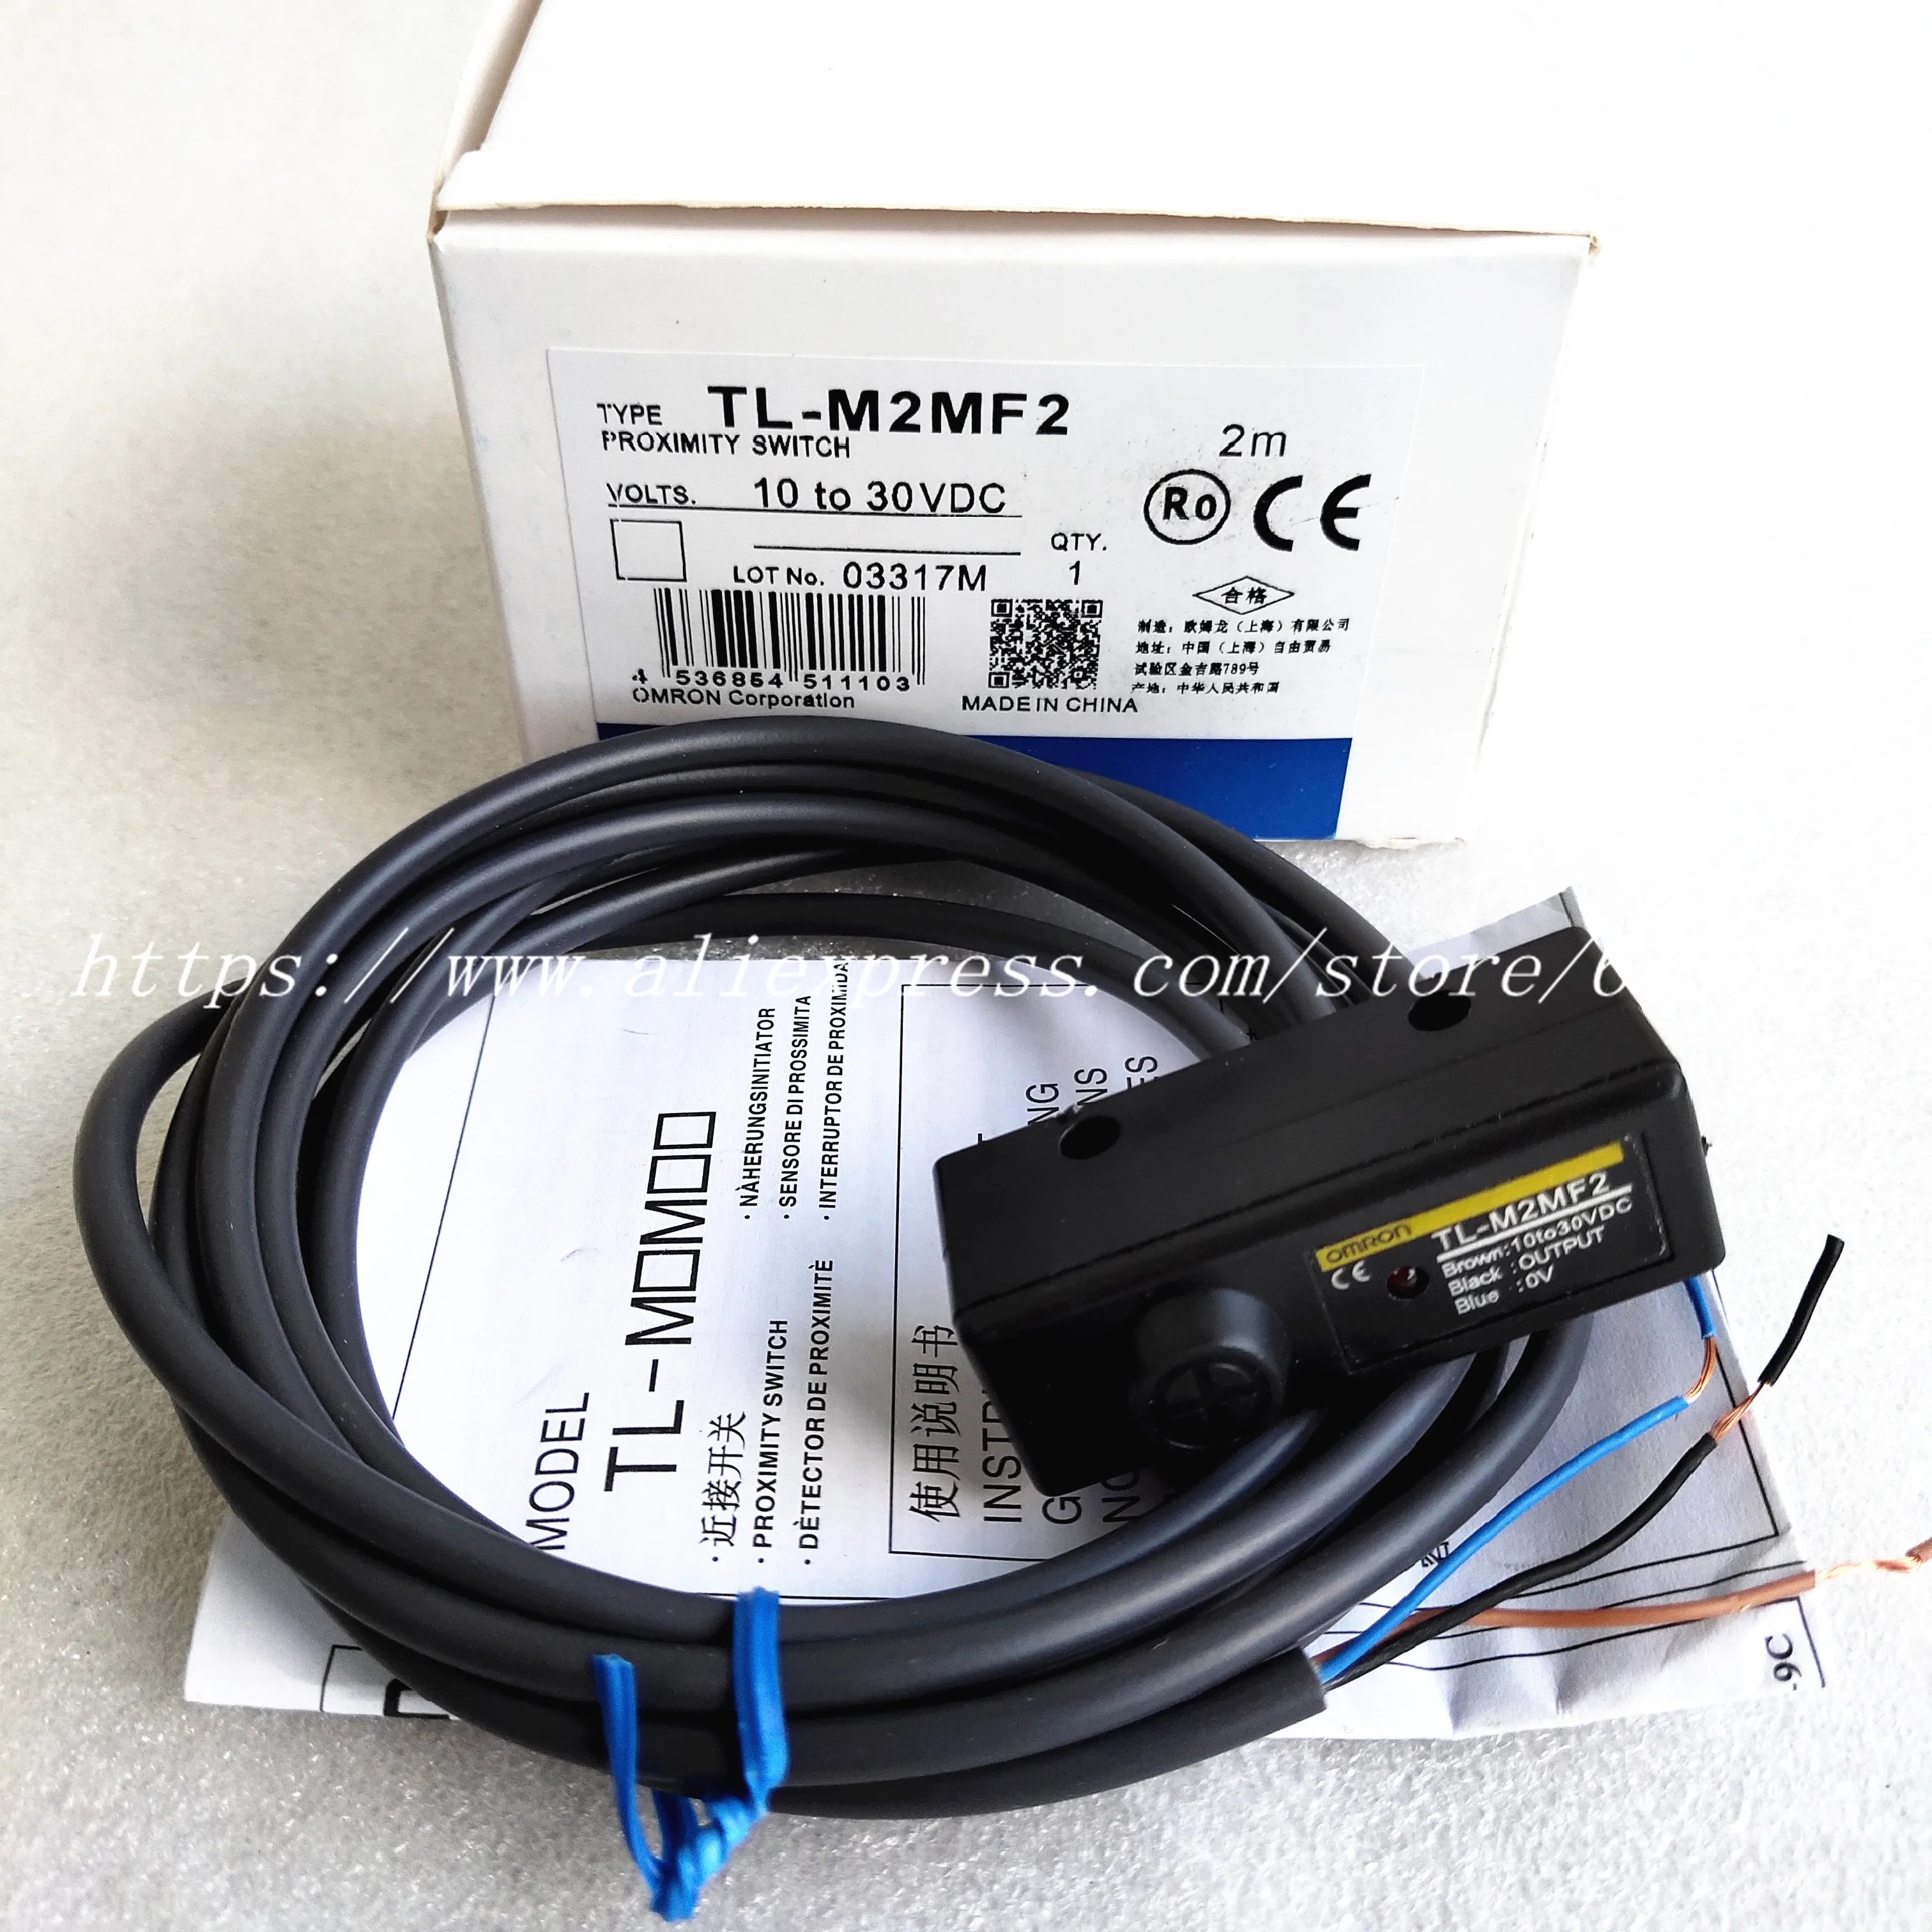 NEW IN BOX  Proximity Switch TL-M5ME2 TLM5ME2 #FP 